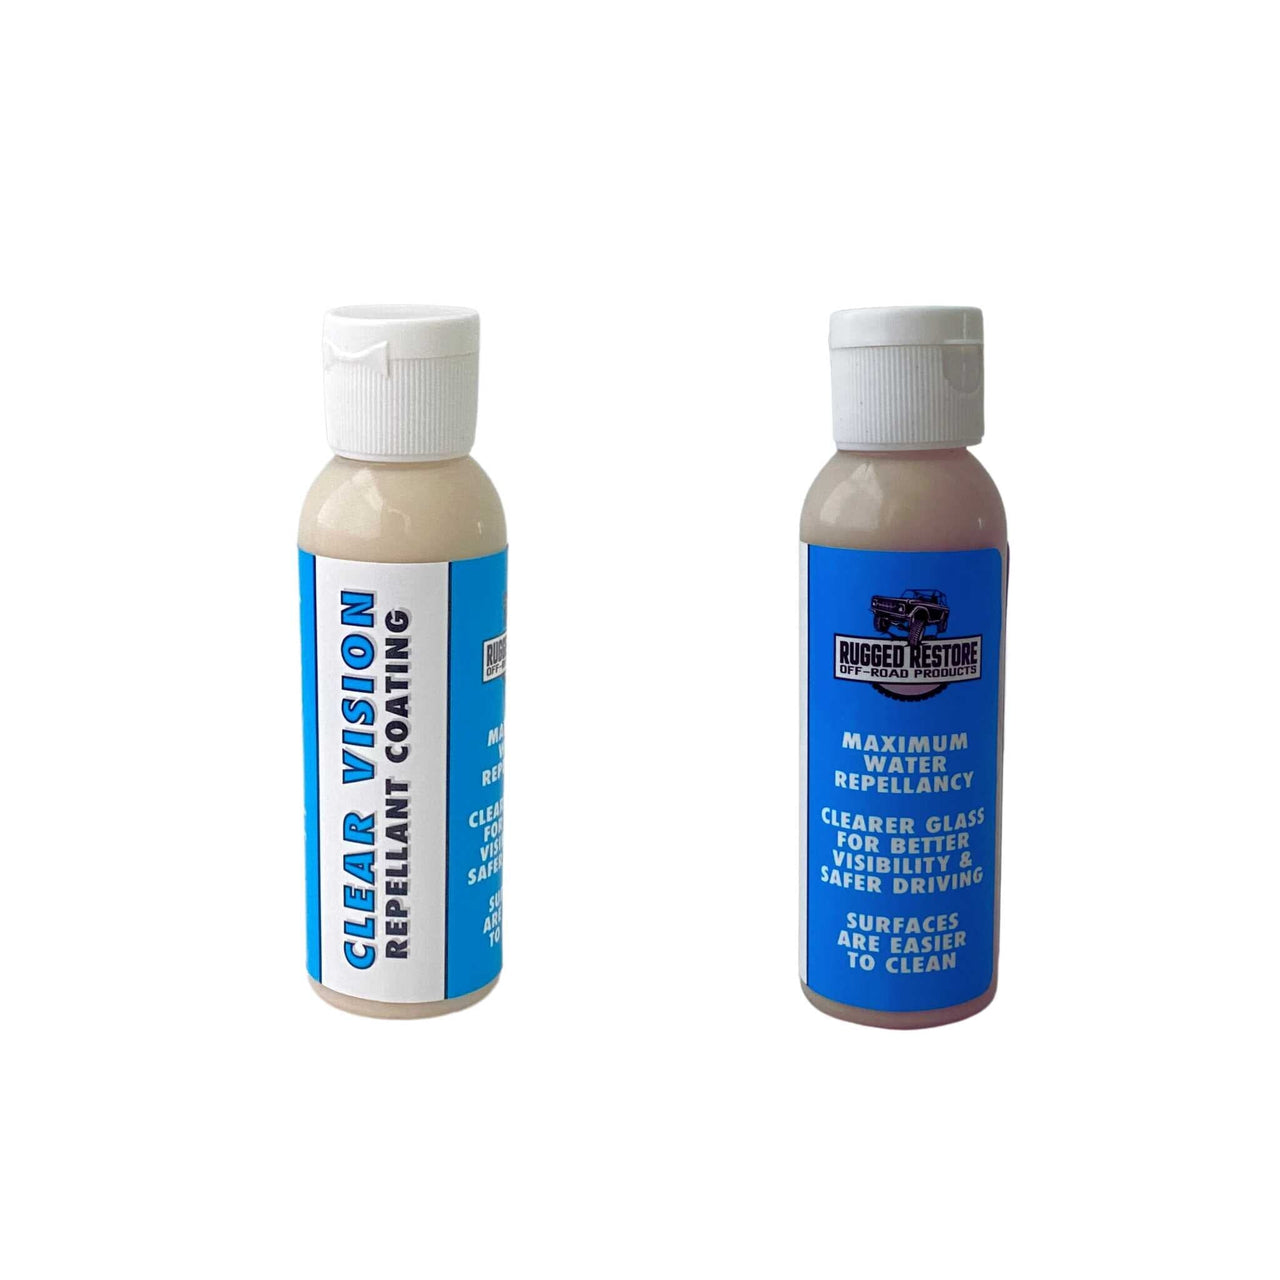 Clear Vision Repellant Glass Coating Coatings 